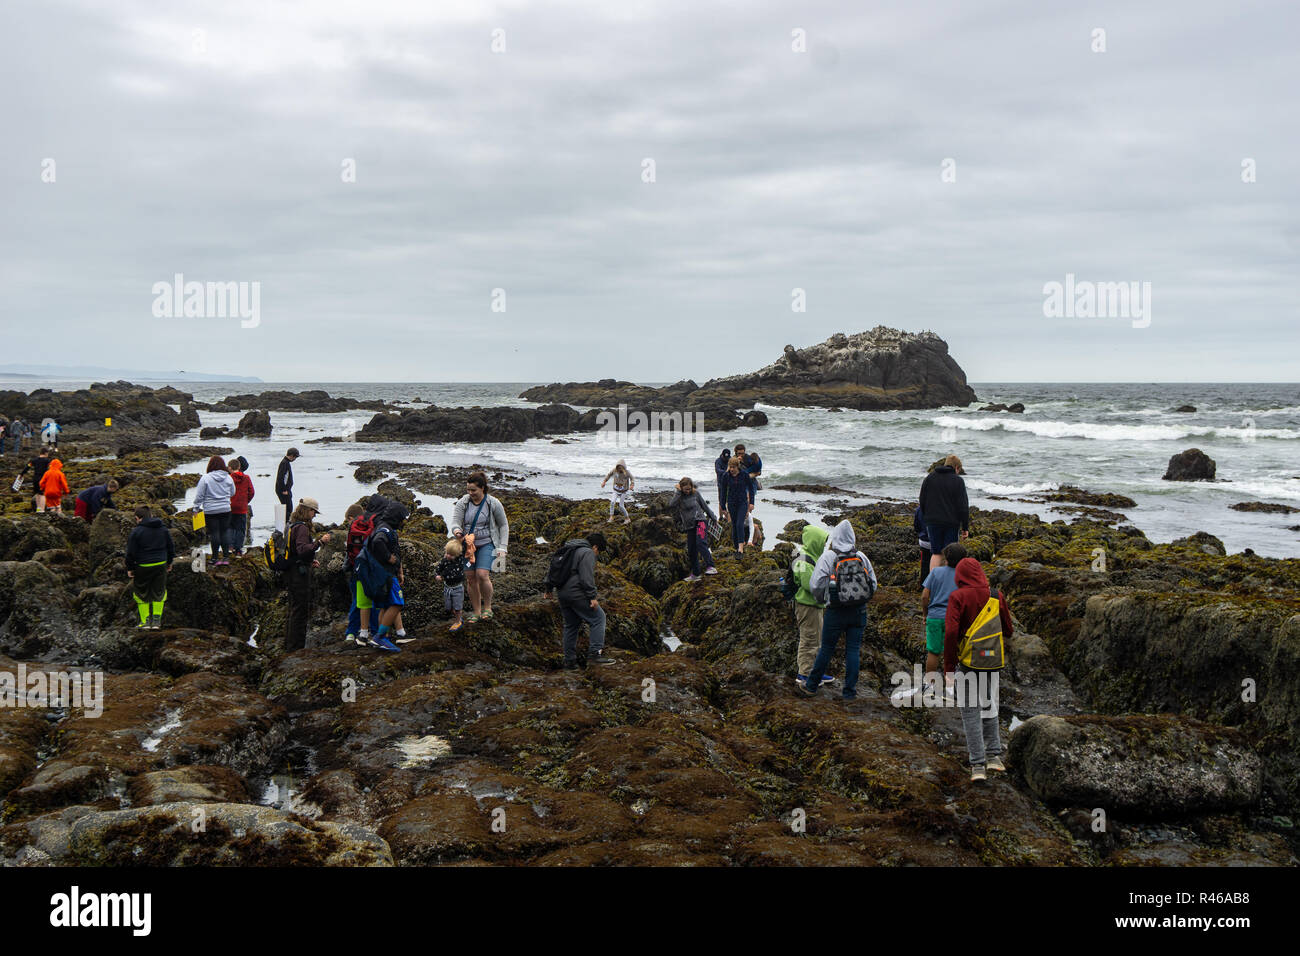 Schoolkids on a educational school trip to discover the tidepools sea life with rangers at Cobble Beach, Yaquina Head Outstanding Natural Area, Oregon Stock Photo